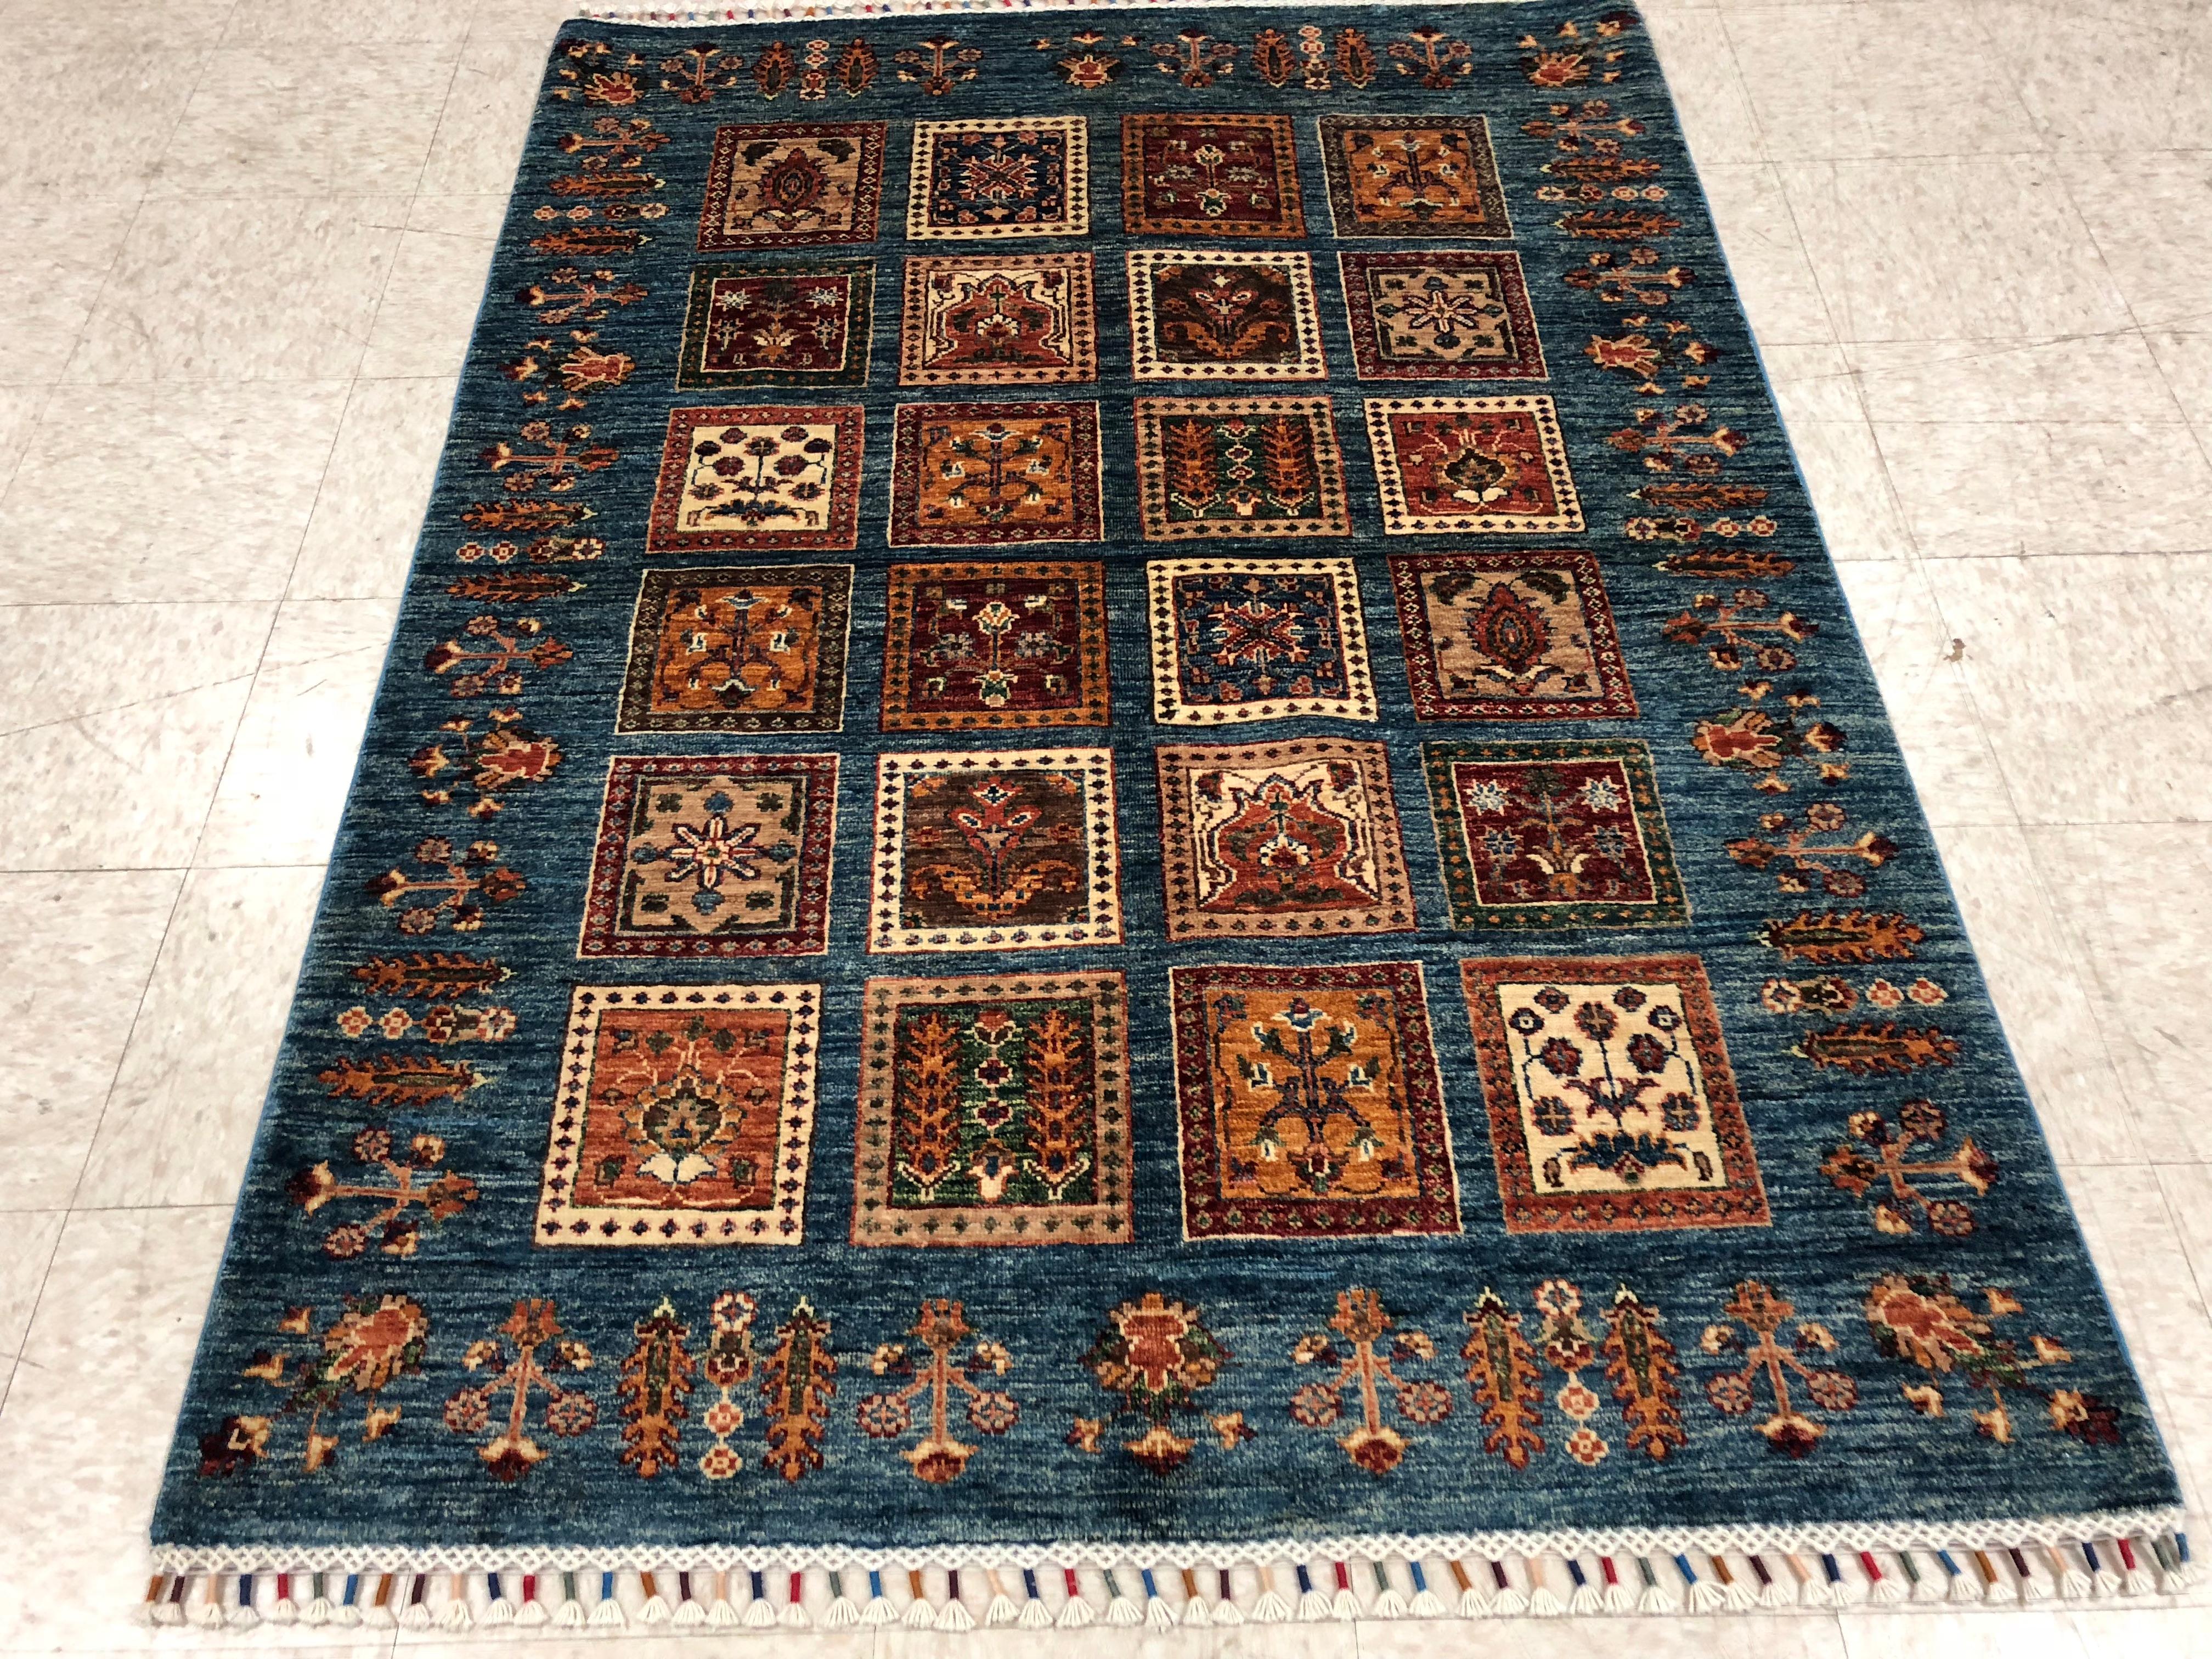 Afghan rugs are handwoven in Afghanistan. This country has a long history in weaving Rugs. A big number of rugs that were handwoven in Pakistan were actually handwoven by Afghan refugees who fled Afghanistan after Russia invaded this country in